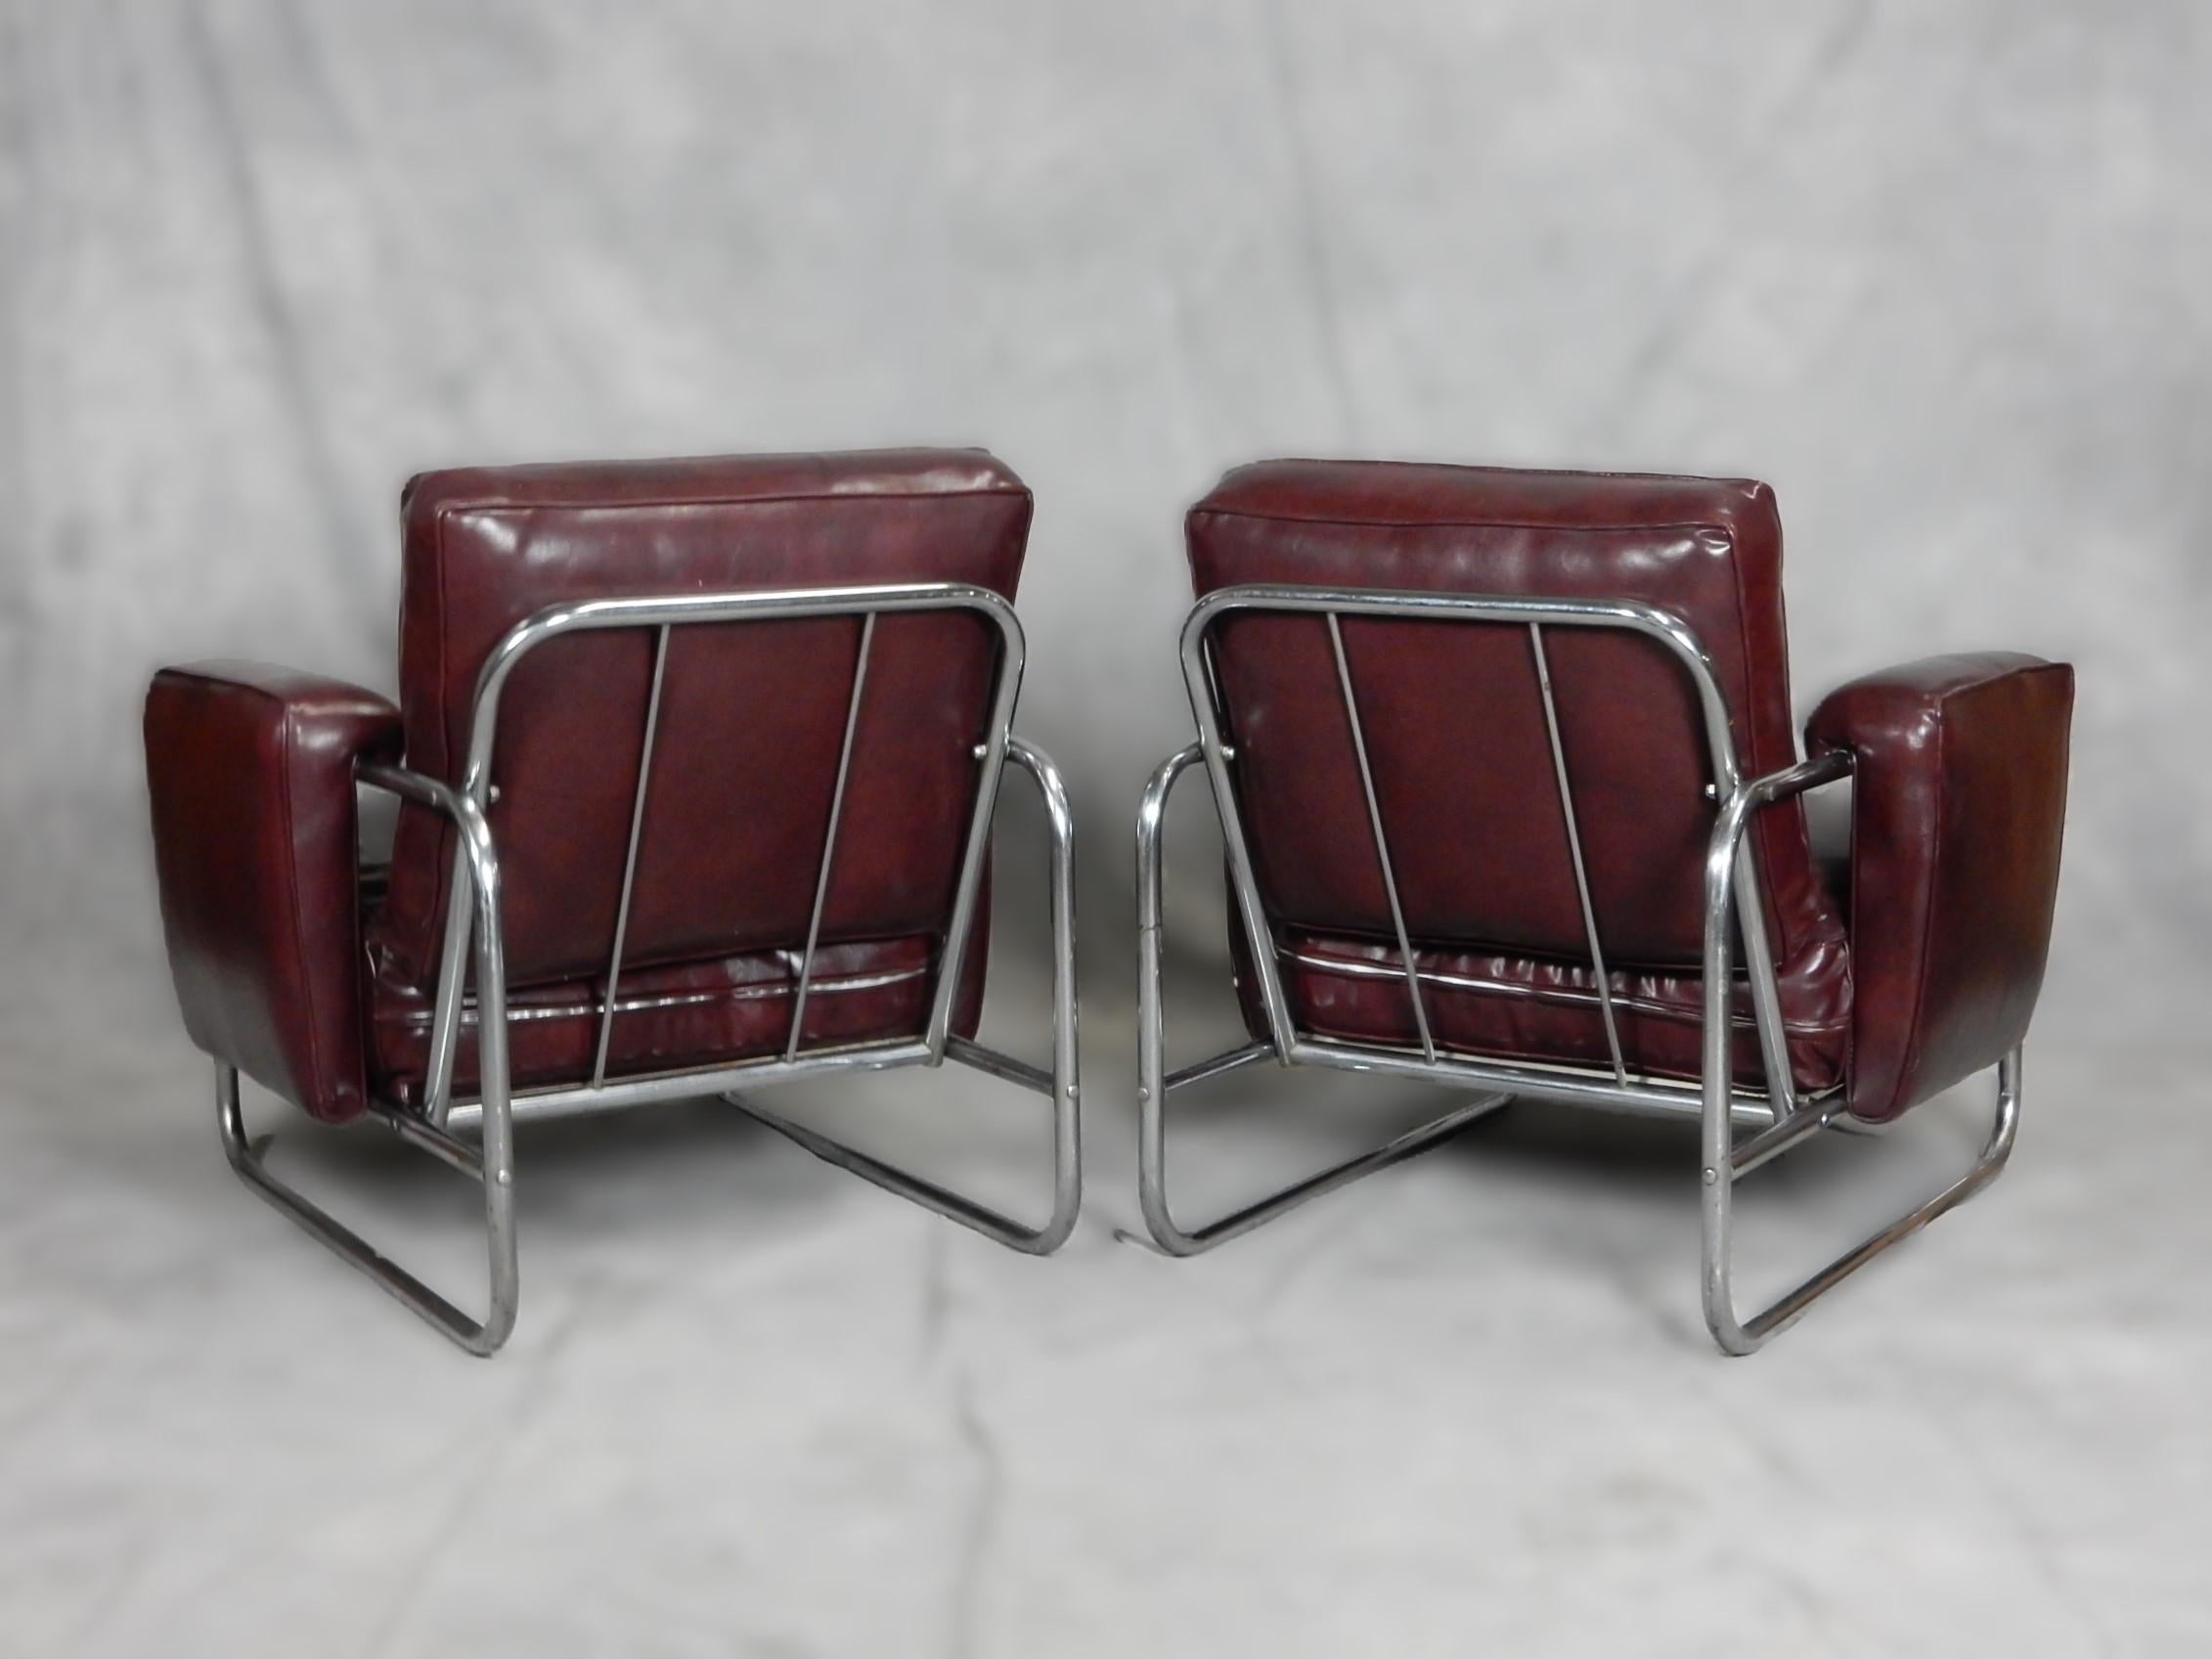 Machine Age Machine age Industrial Nickel Plated Steel Lounge Chairs For Sale